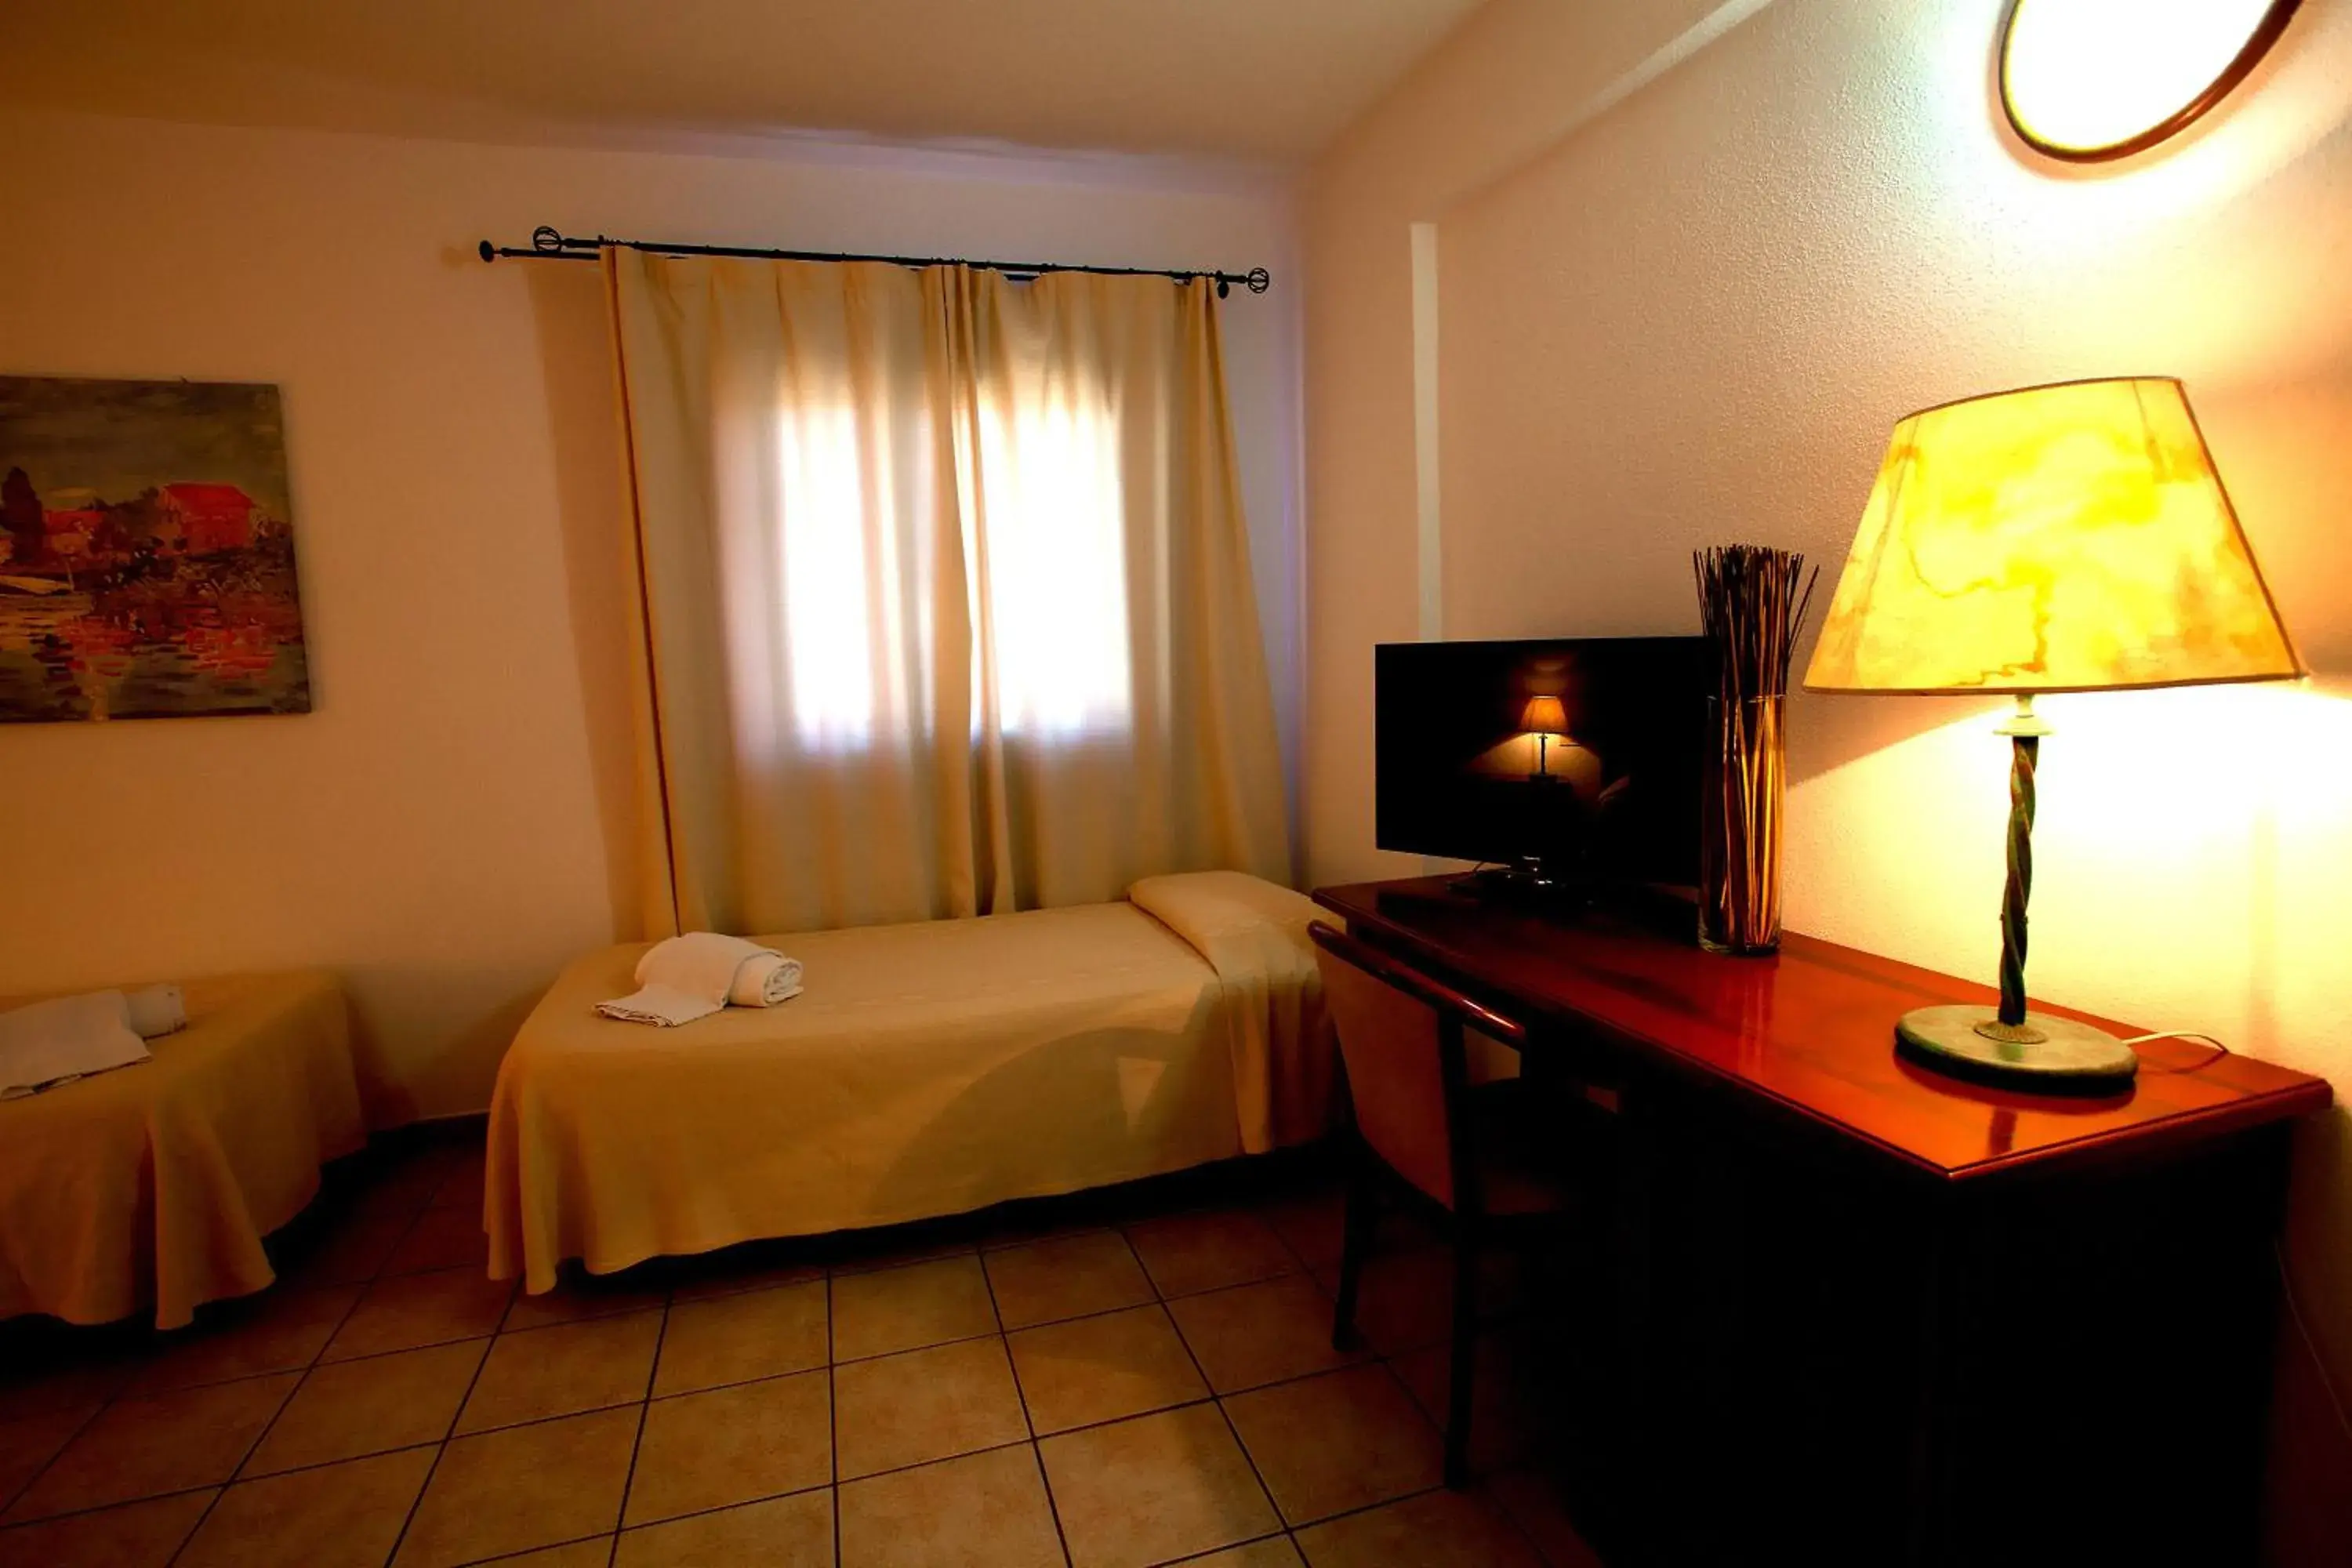 Bed, TV/Entertainment Center in Hotel Moderno